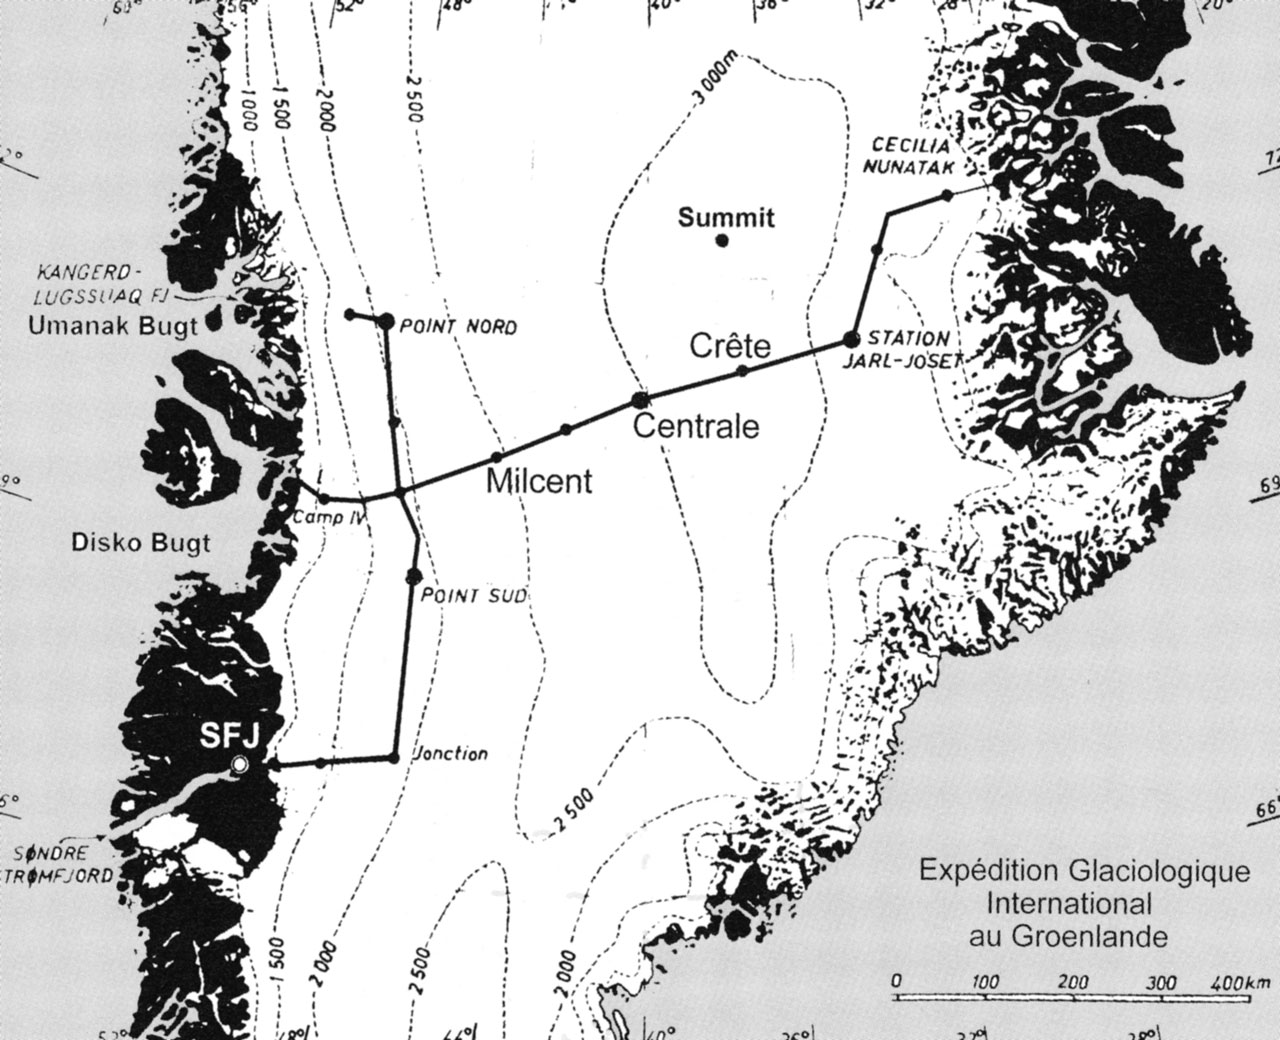 Map of Greenland with marked zones